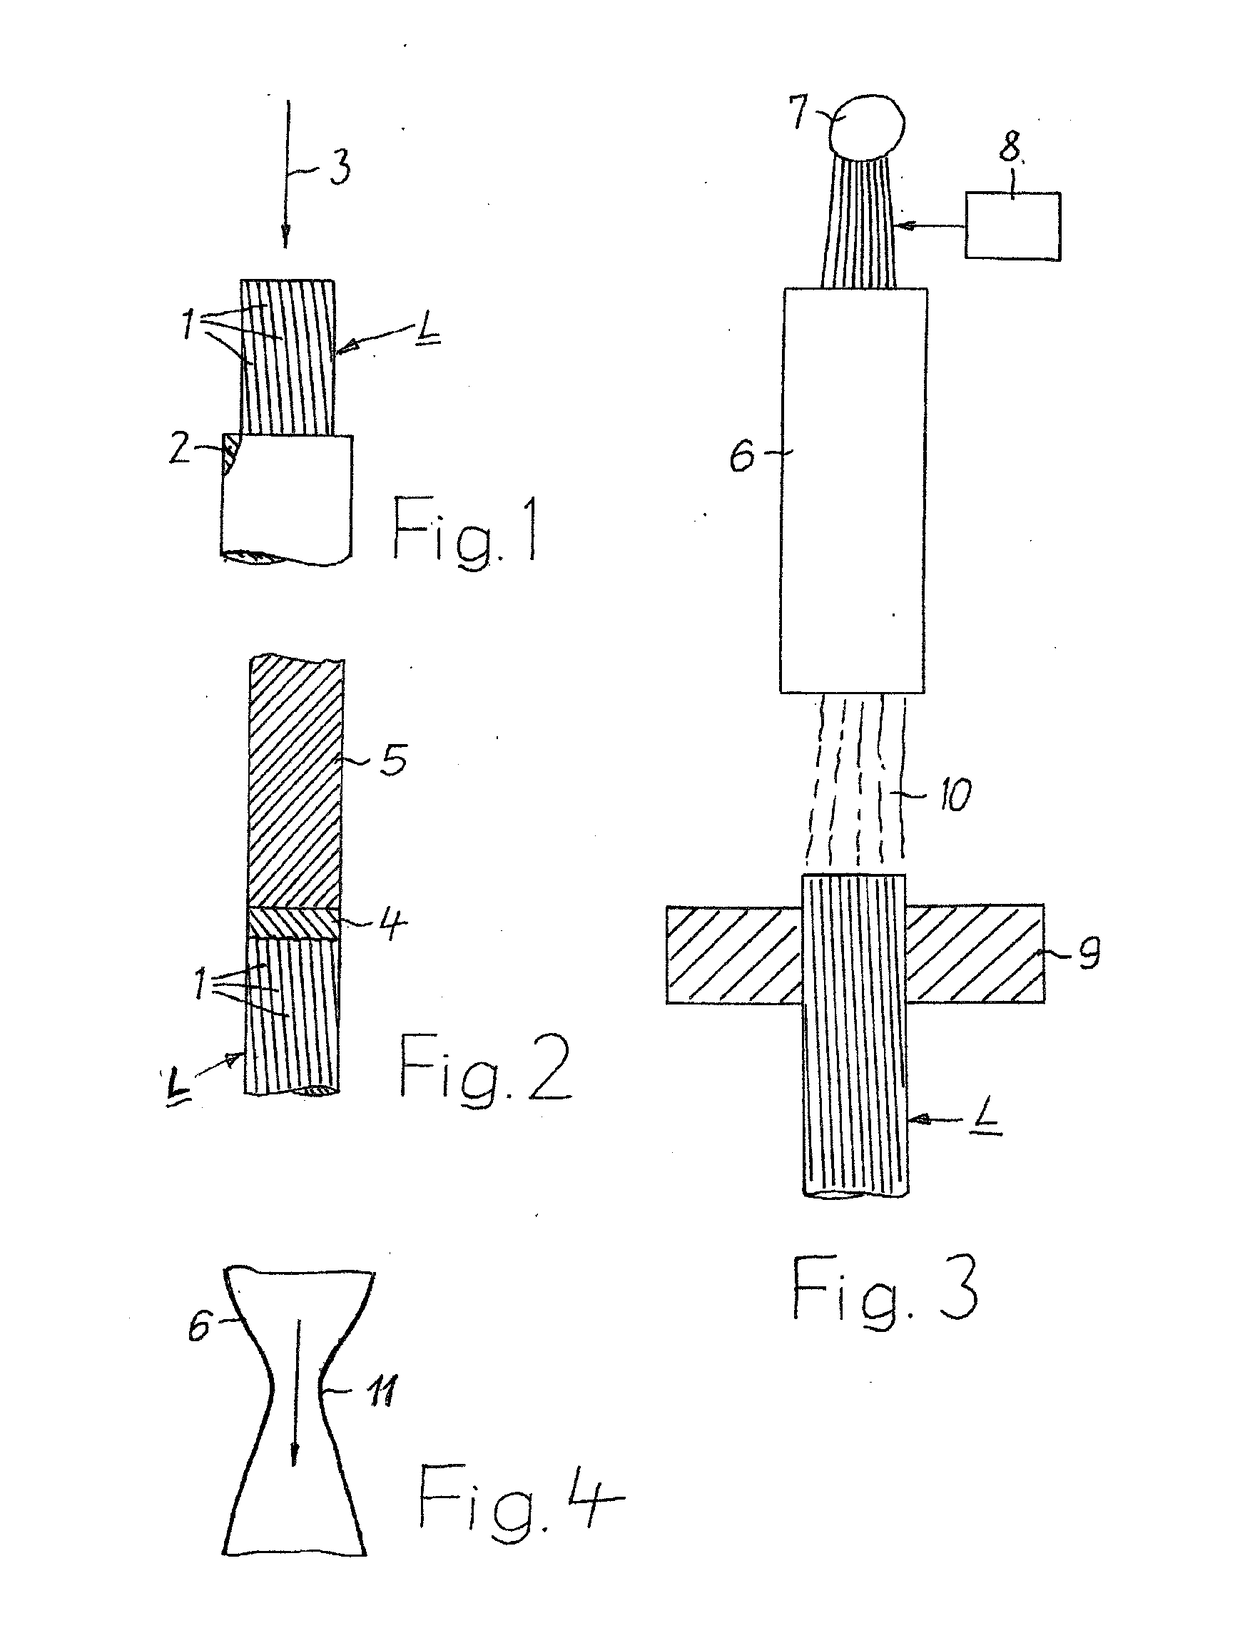 Method for attaching a contact element to the end of an electrical conductor